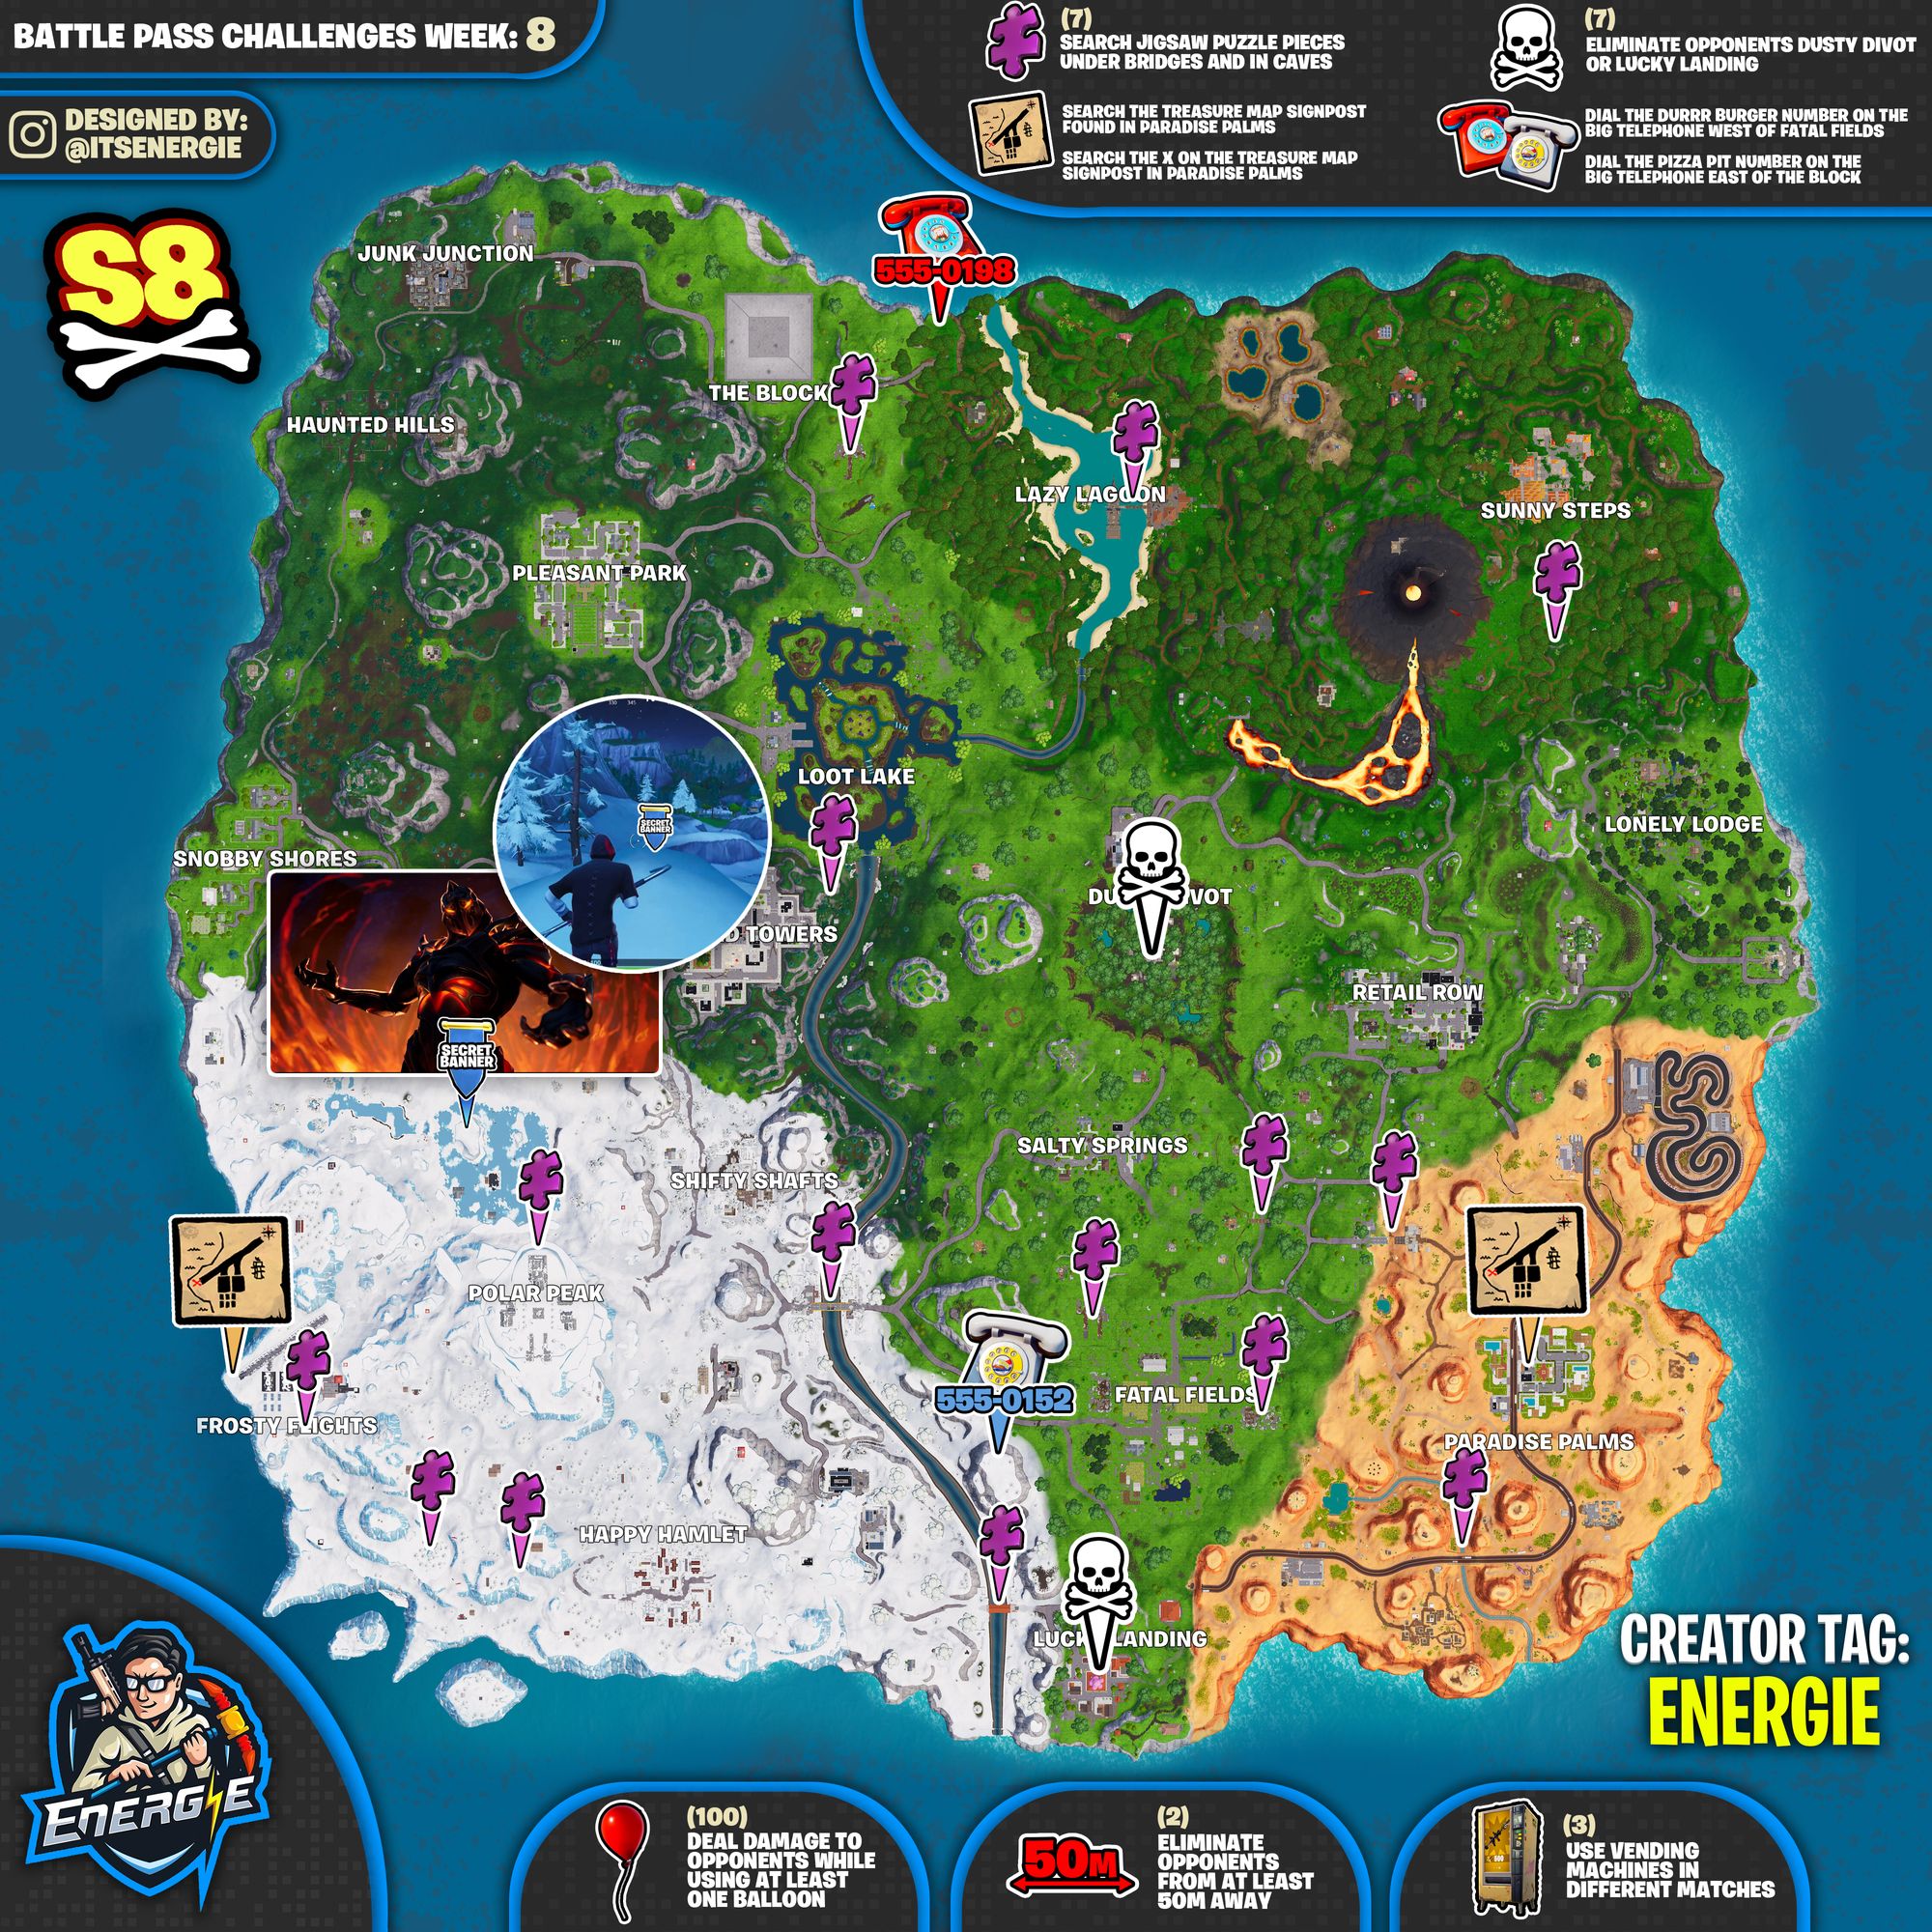 if you need any assistance with week 8 s challenges itsenergie has provided one of his cheat sheets to help out - search jigsaw puzzle pieces under bridges and in caves fortnite season 8 week 8